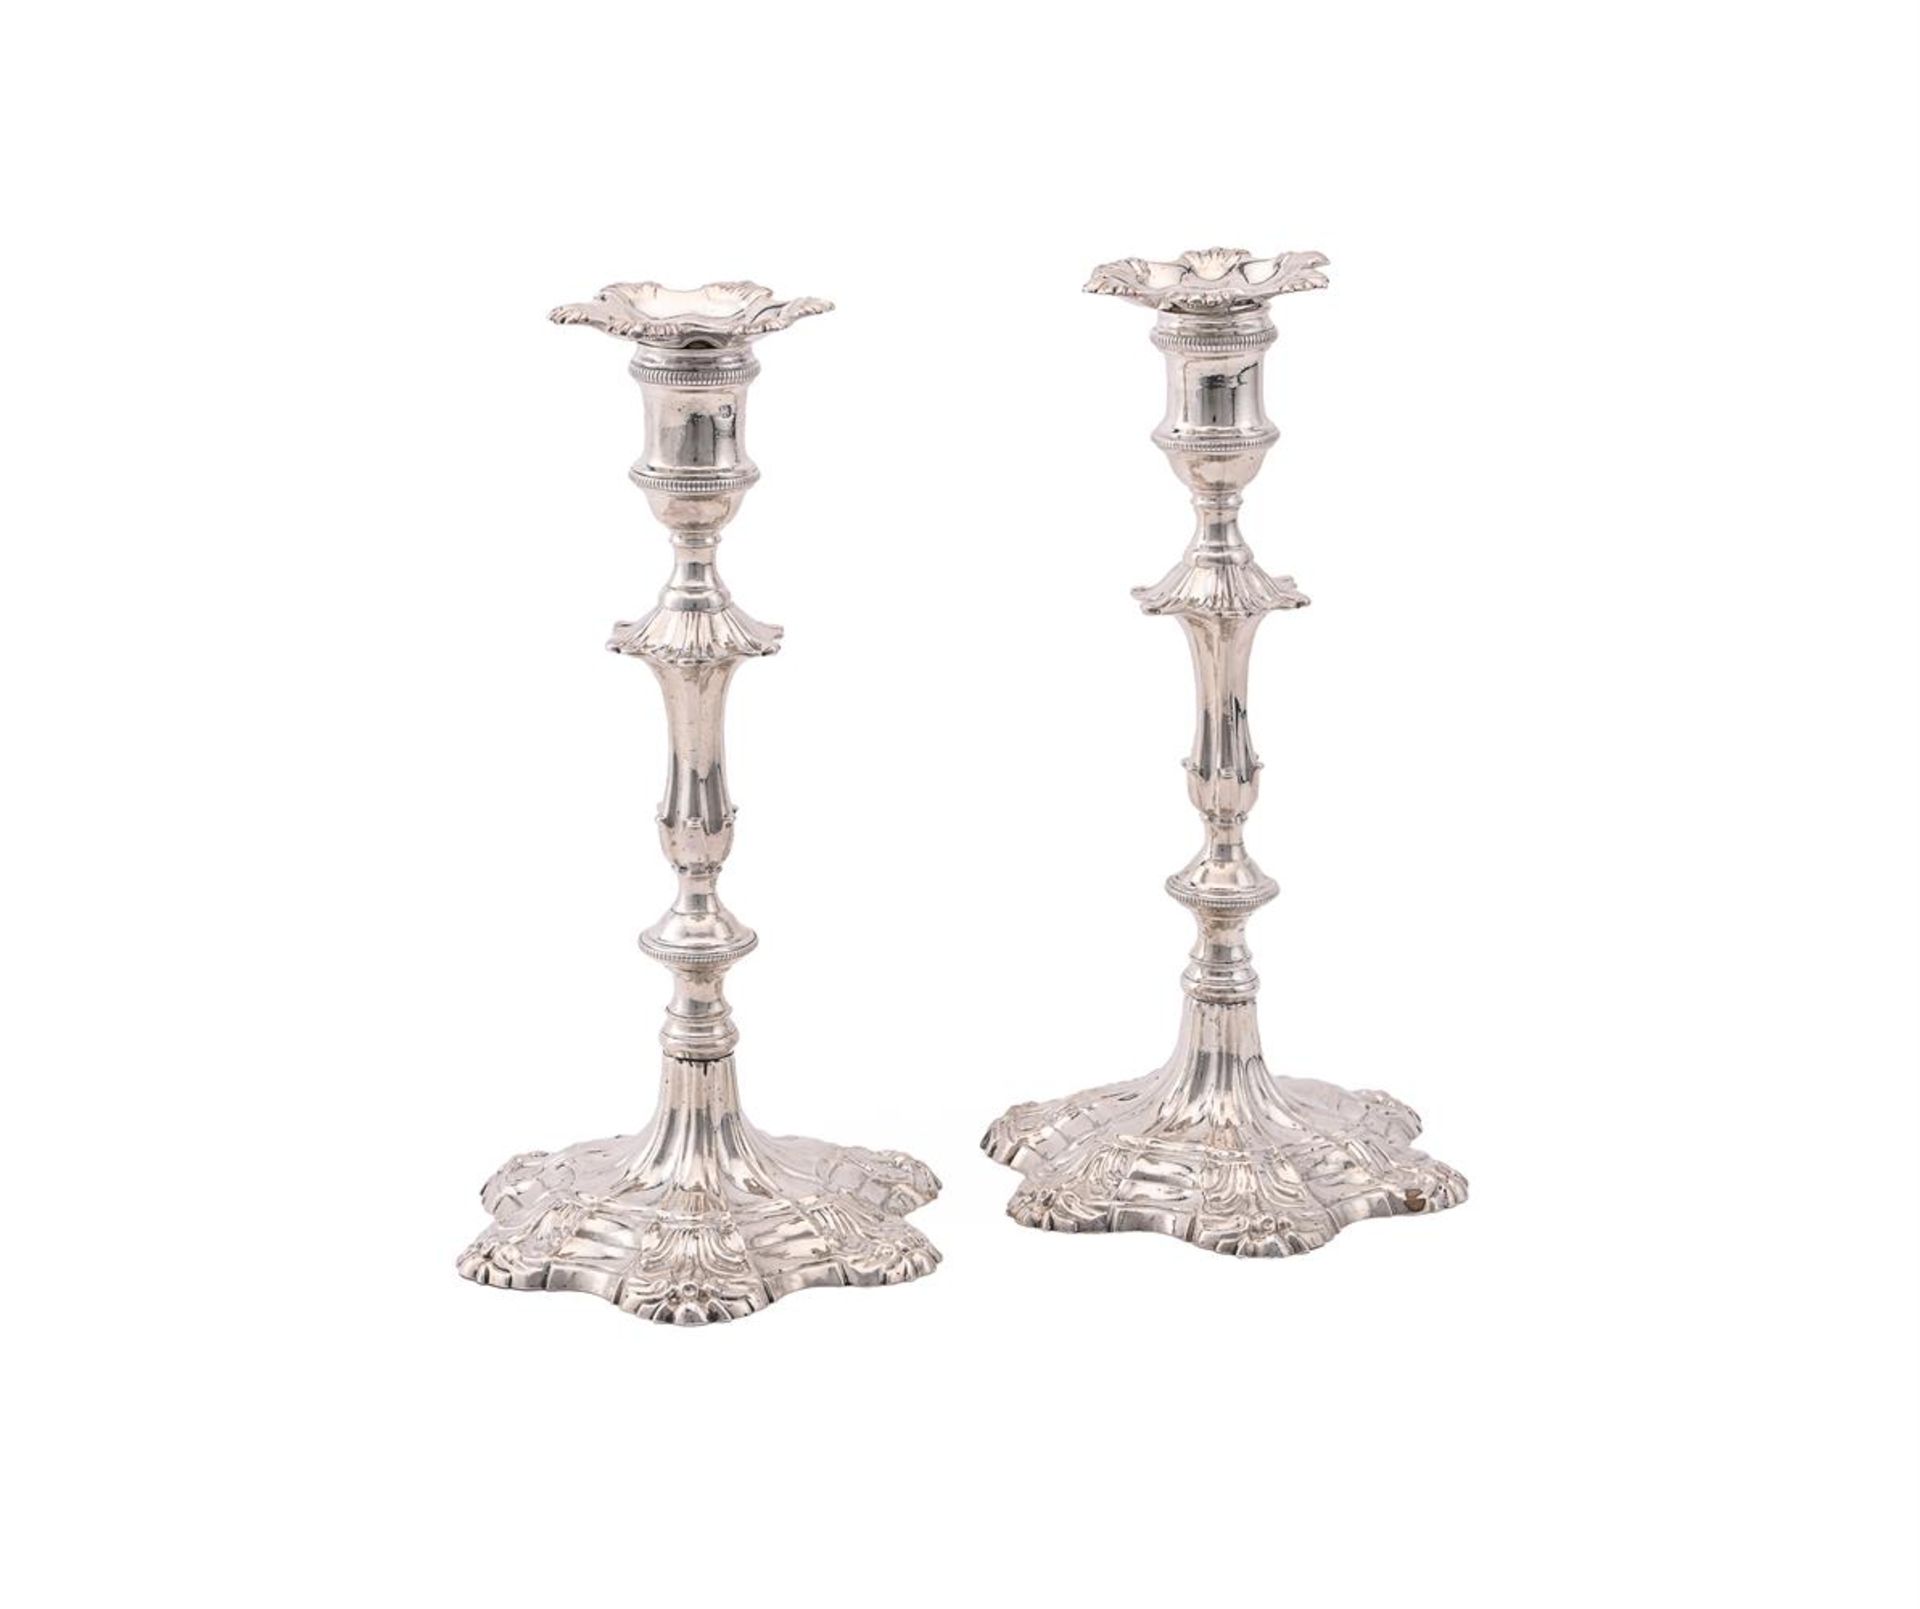 A PAIR OF GEORGE II CAST SILVER CANDLESTICKS